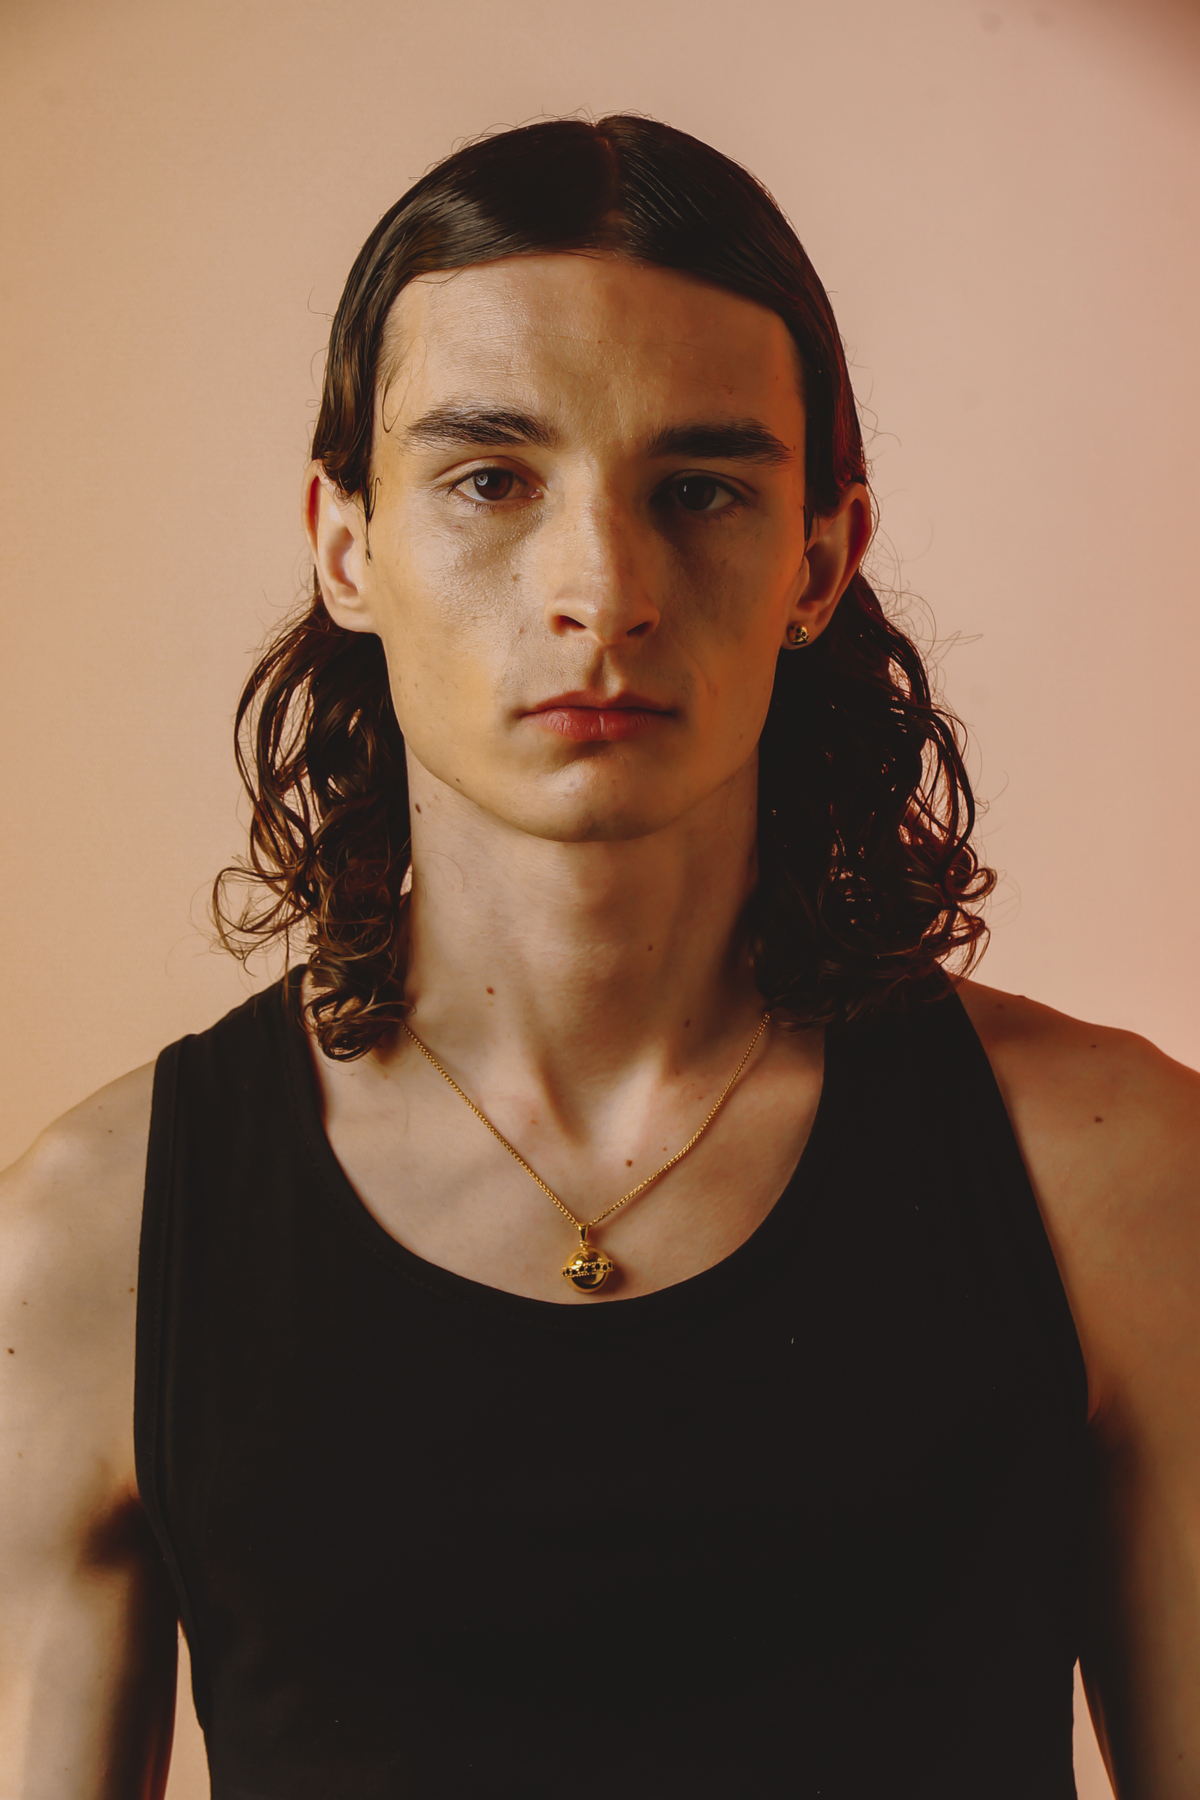 Get to Know Feather Pendants, the Genderless Jewelry Brand from London